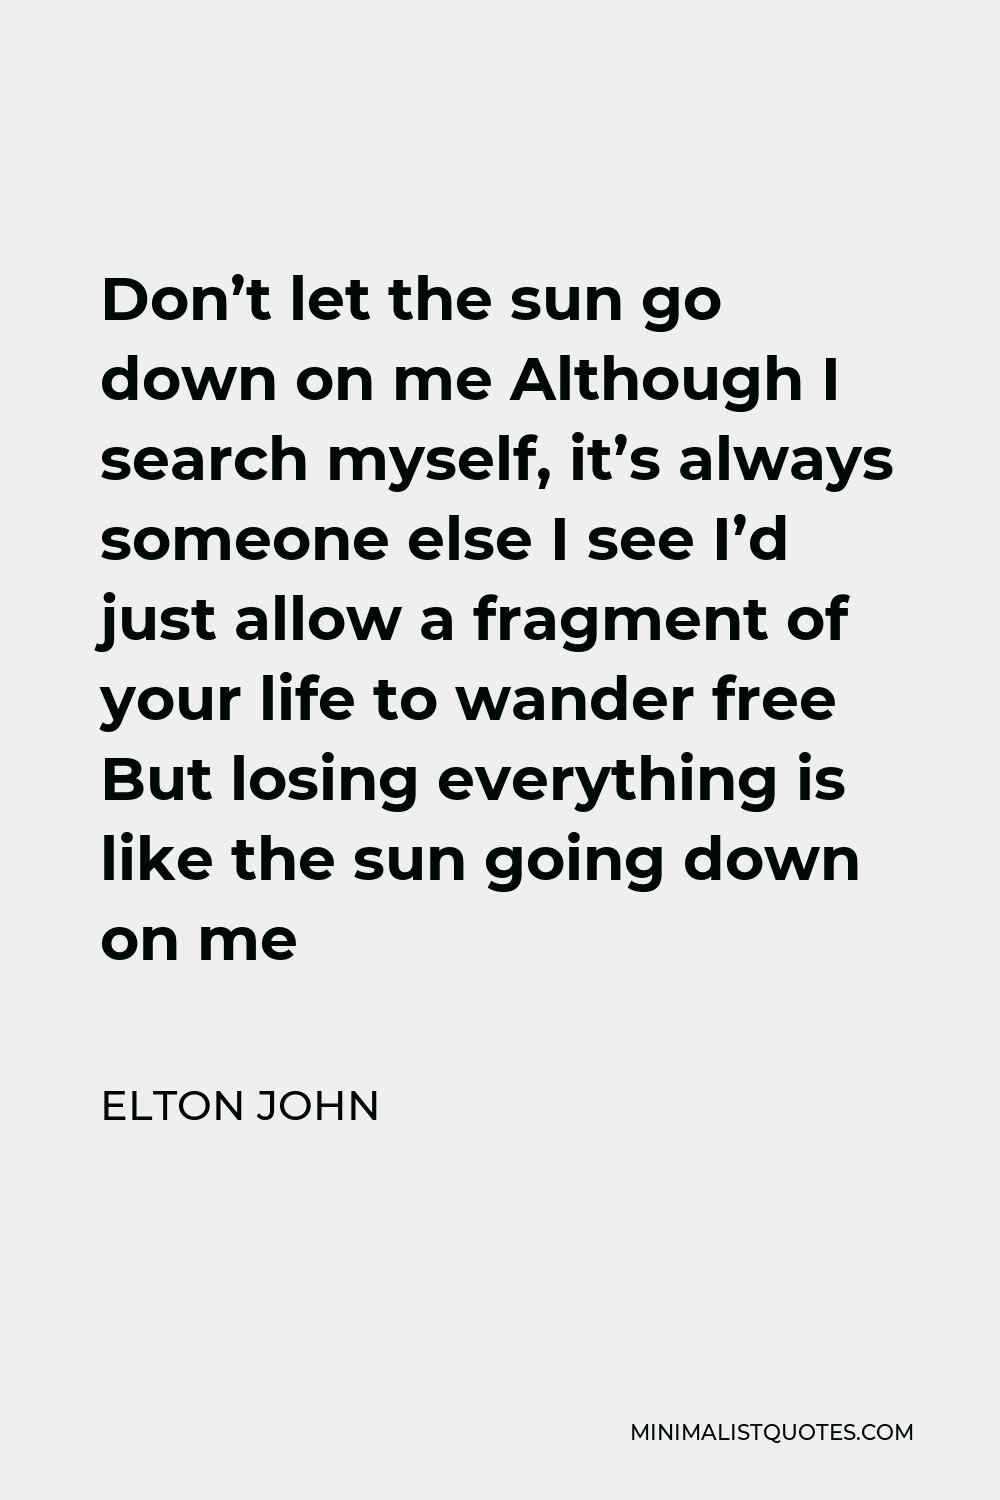 Elton John Quote - Don’t let the sun go down on me Although I search myself, it’s always someone else I see I’d just allow a fragment of your life to wander free But losing everything is like the sun going down on me